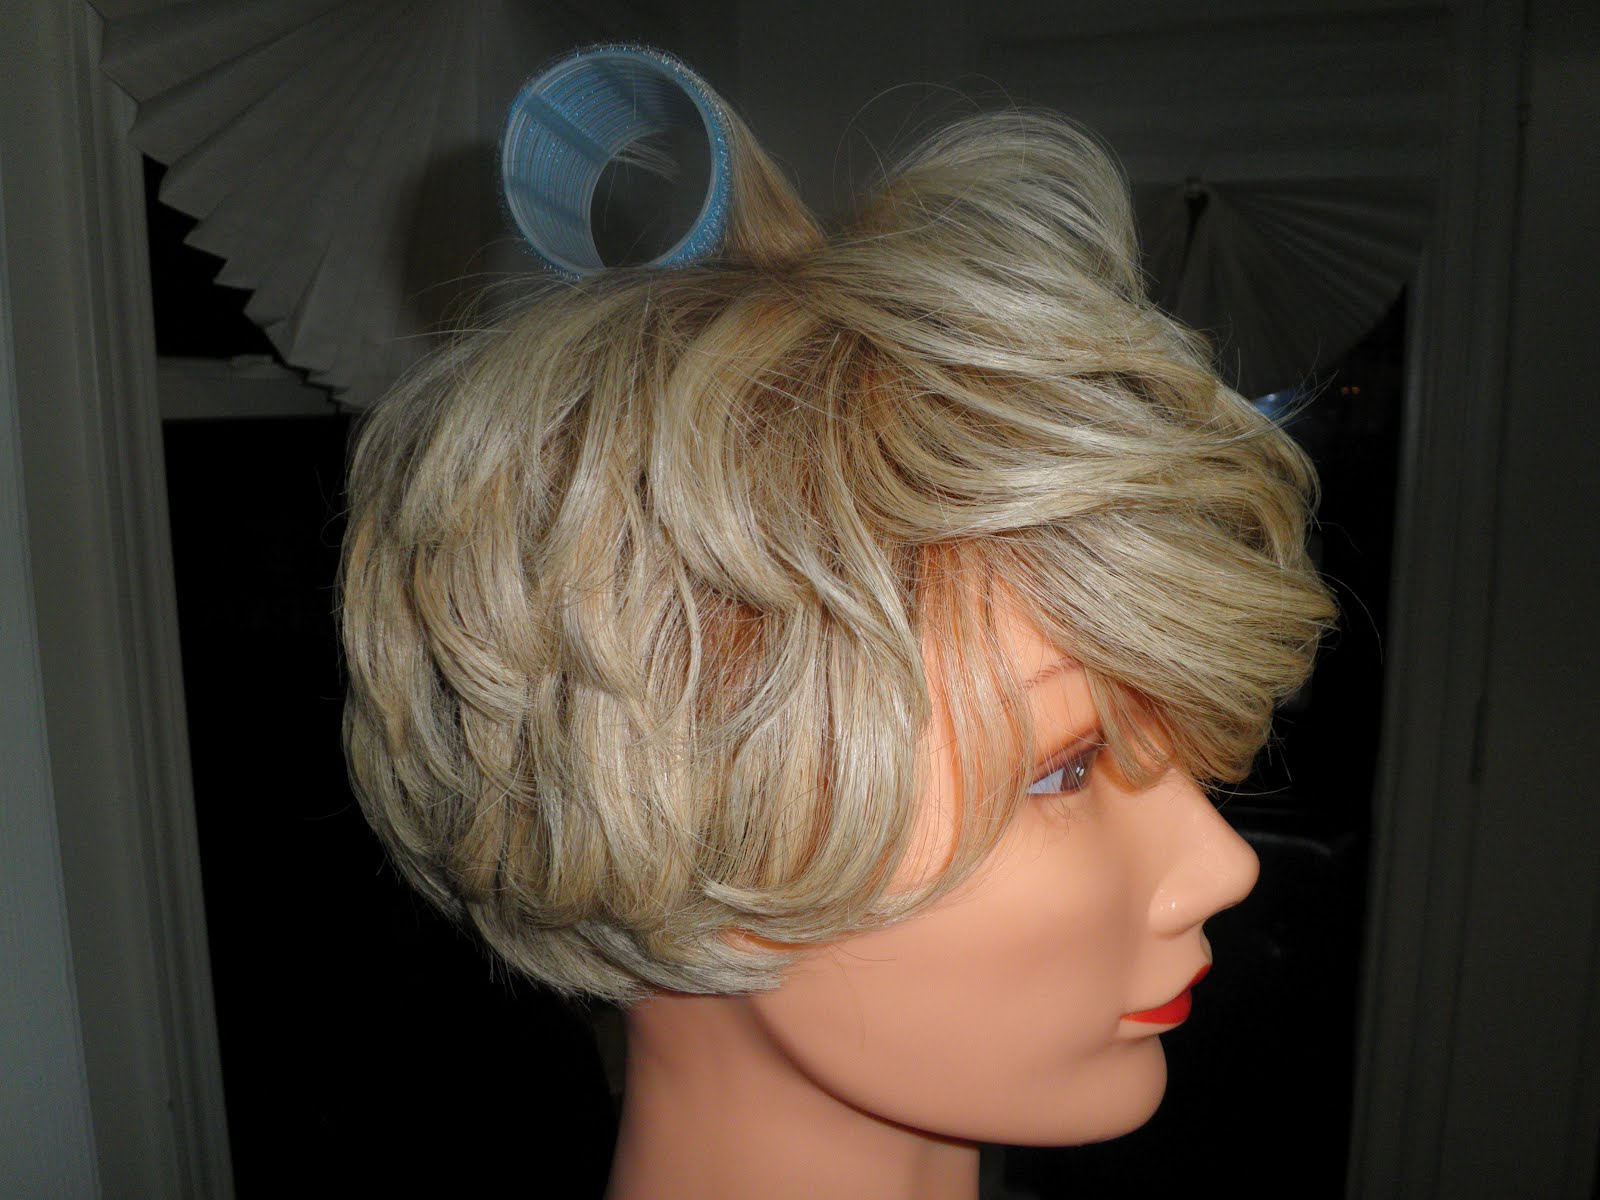 Pics Of A Roller Set Wrap For Short Hair | blackhairstylecuts.com